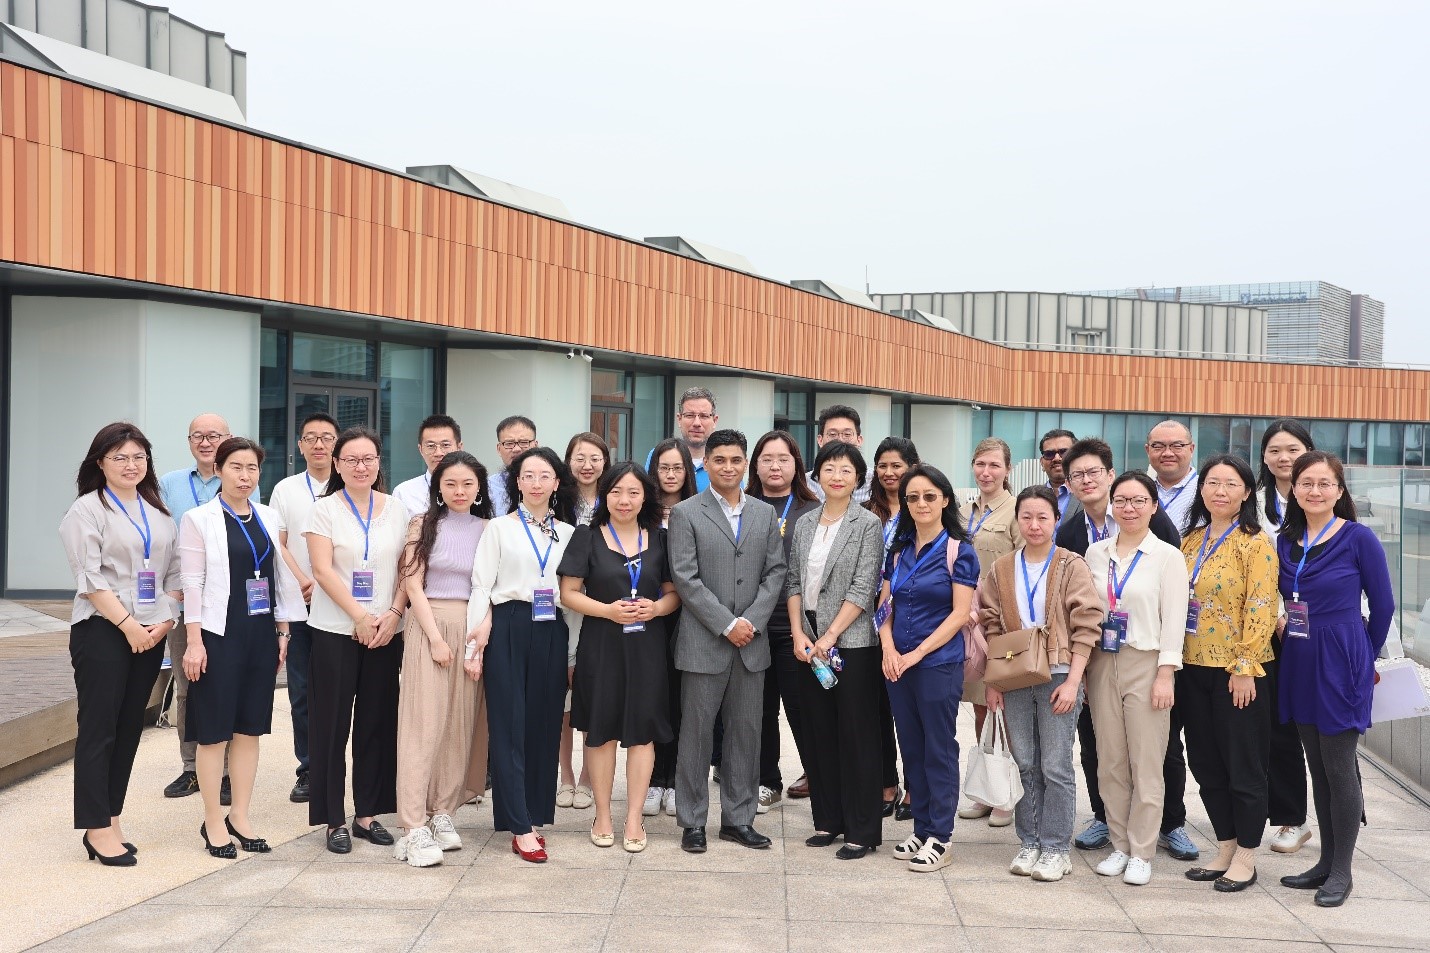 The 10th Conference on Asia and Pacific Economies (CAPE) held in IBSS, XJTLU